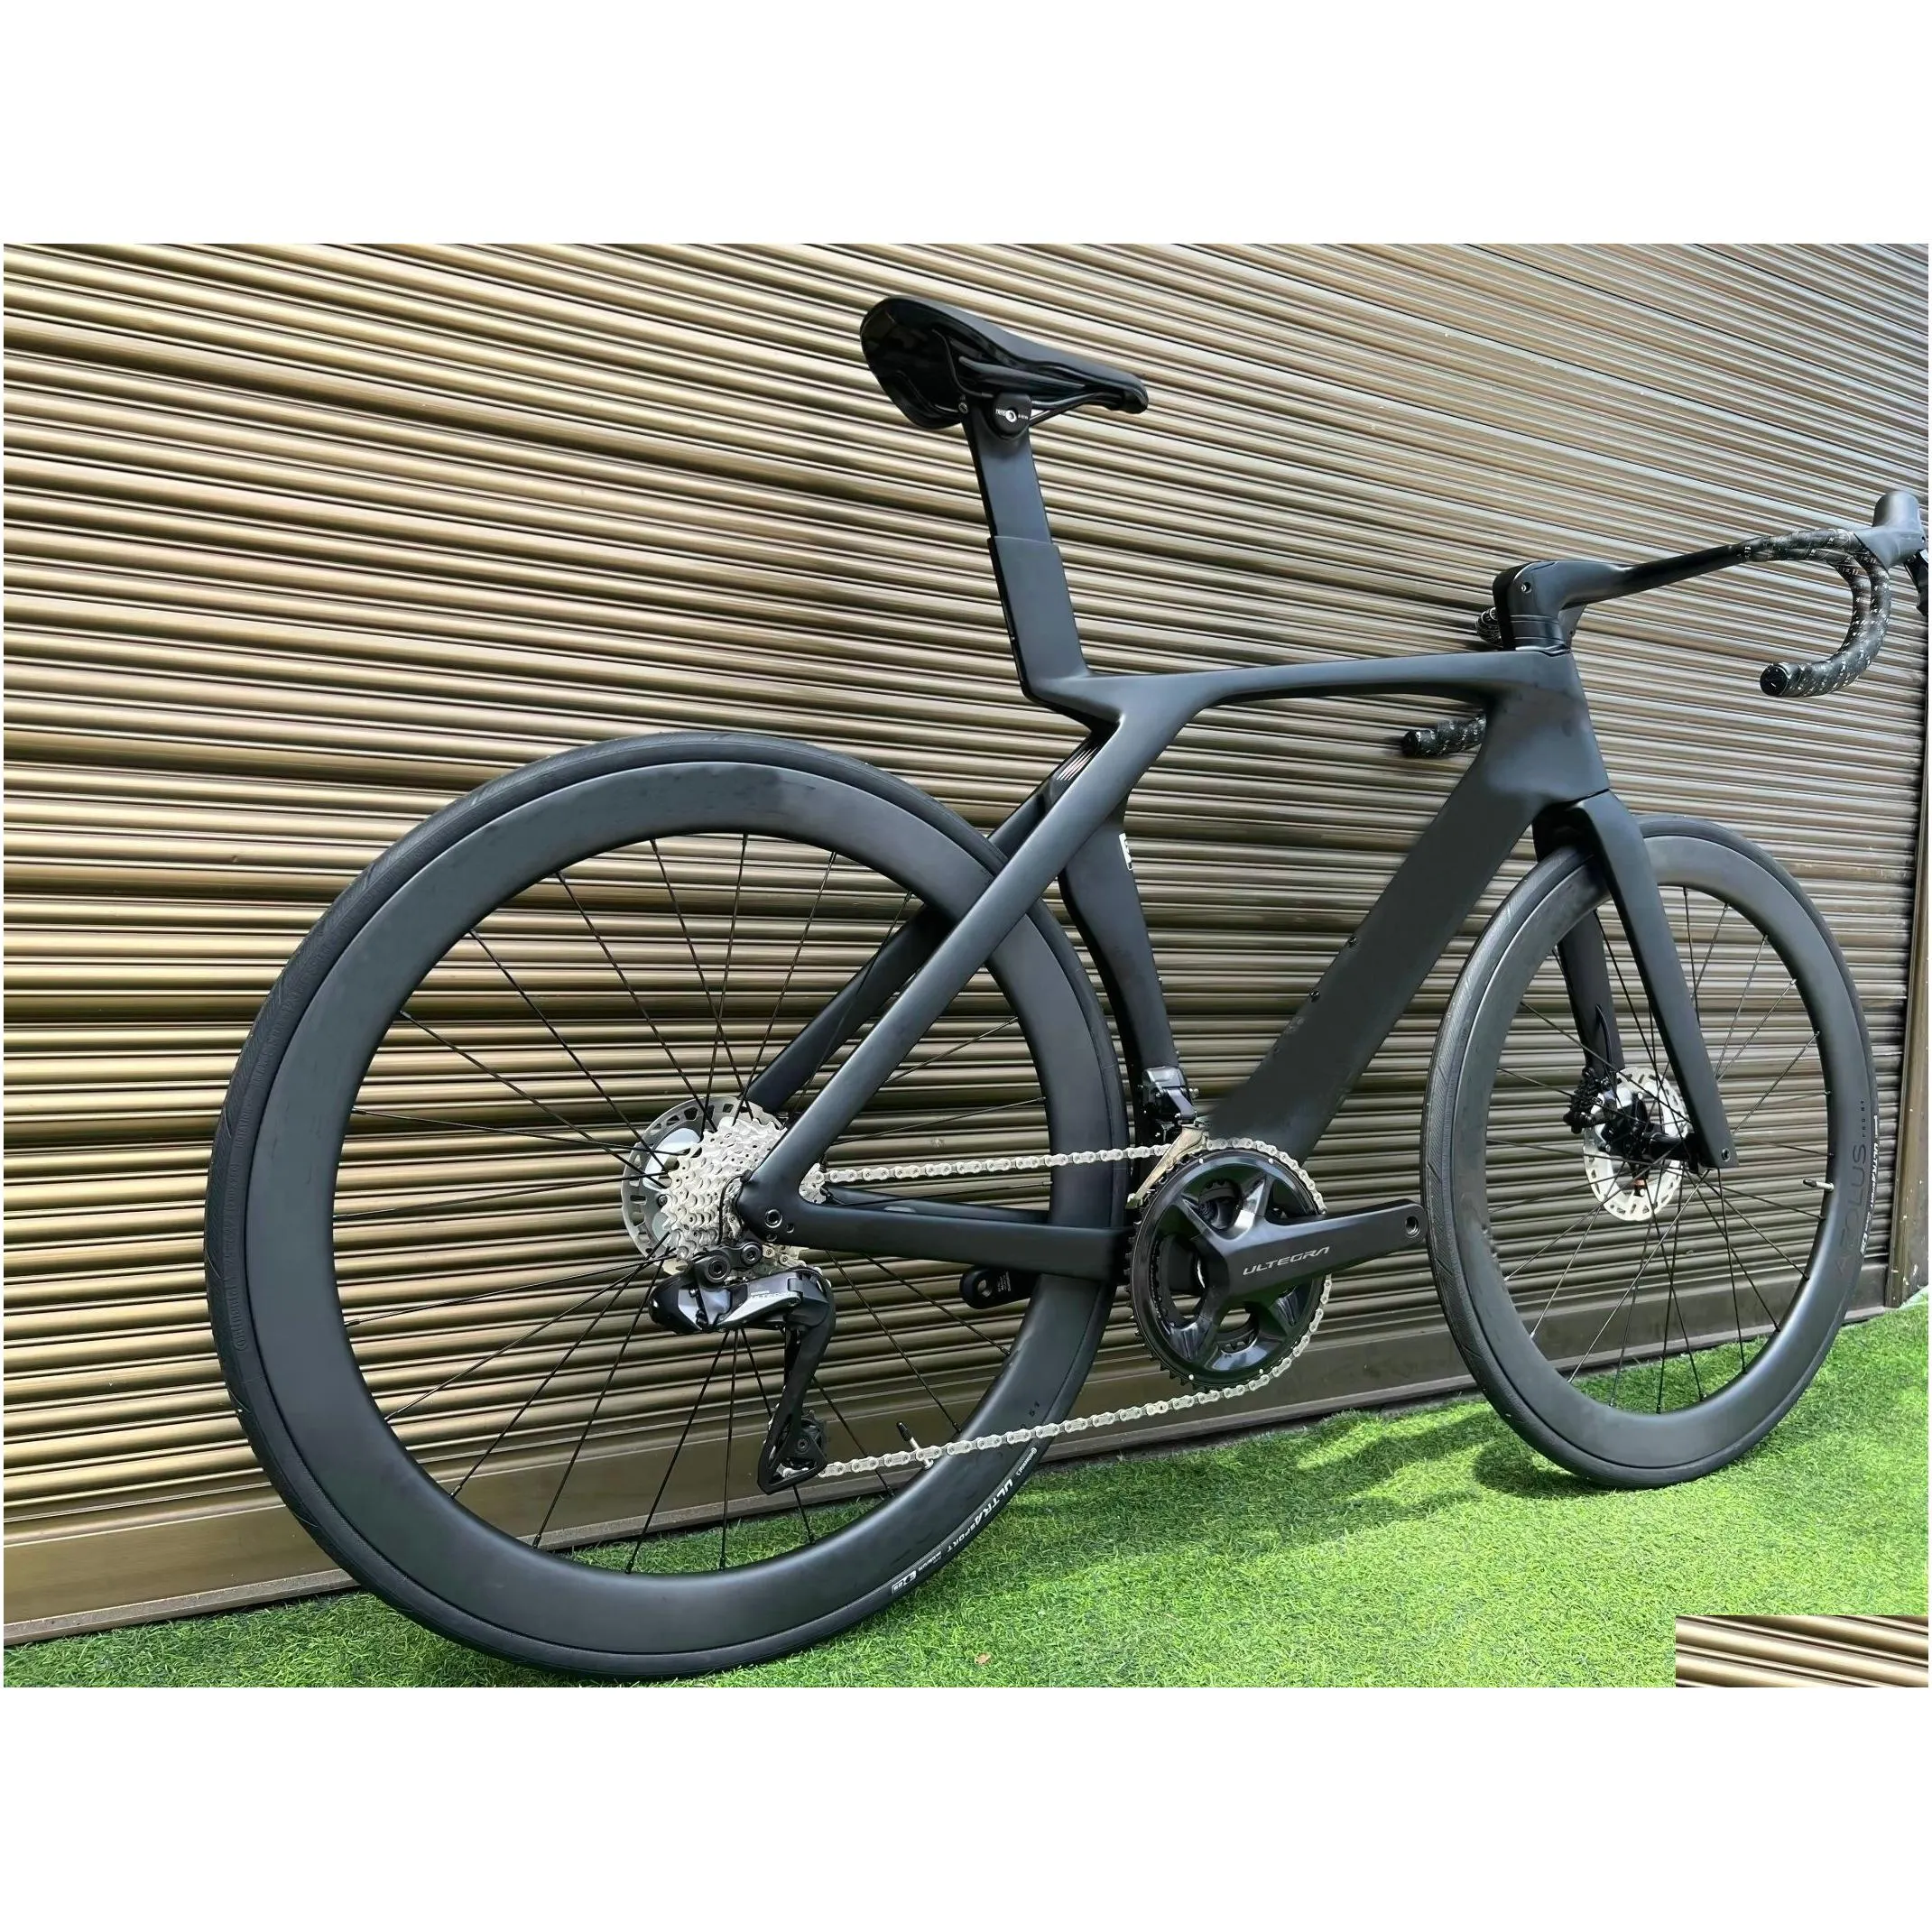 DIY SLR 9 Carbon Road Full Bike Glossy with R7170 di2 Groupset, 50mm Carbon Wheelset